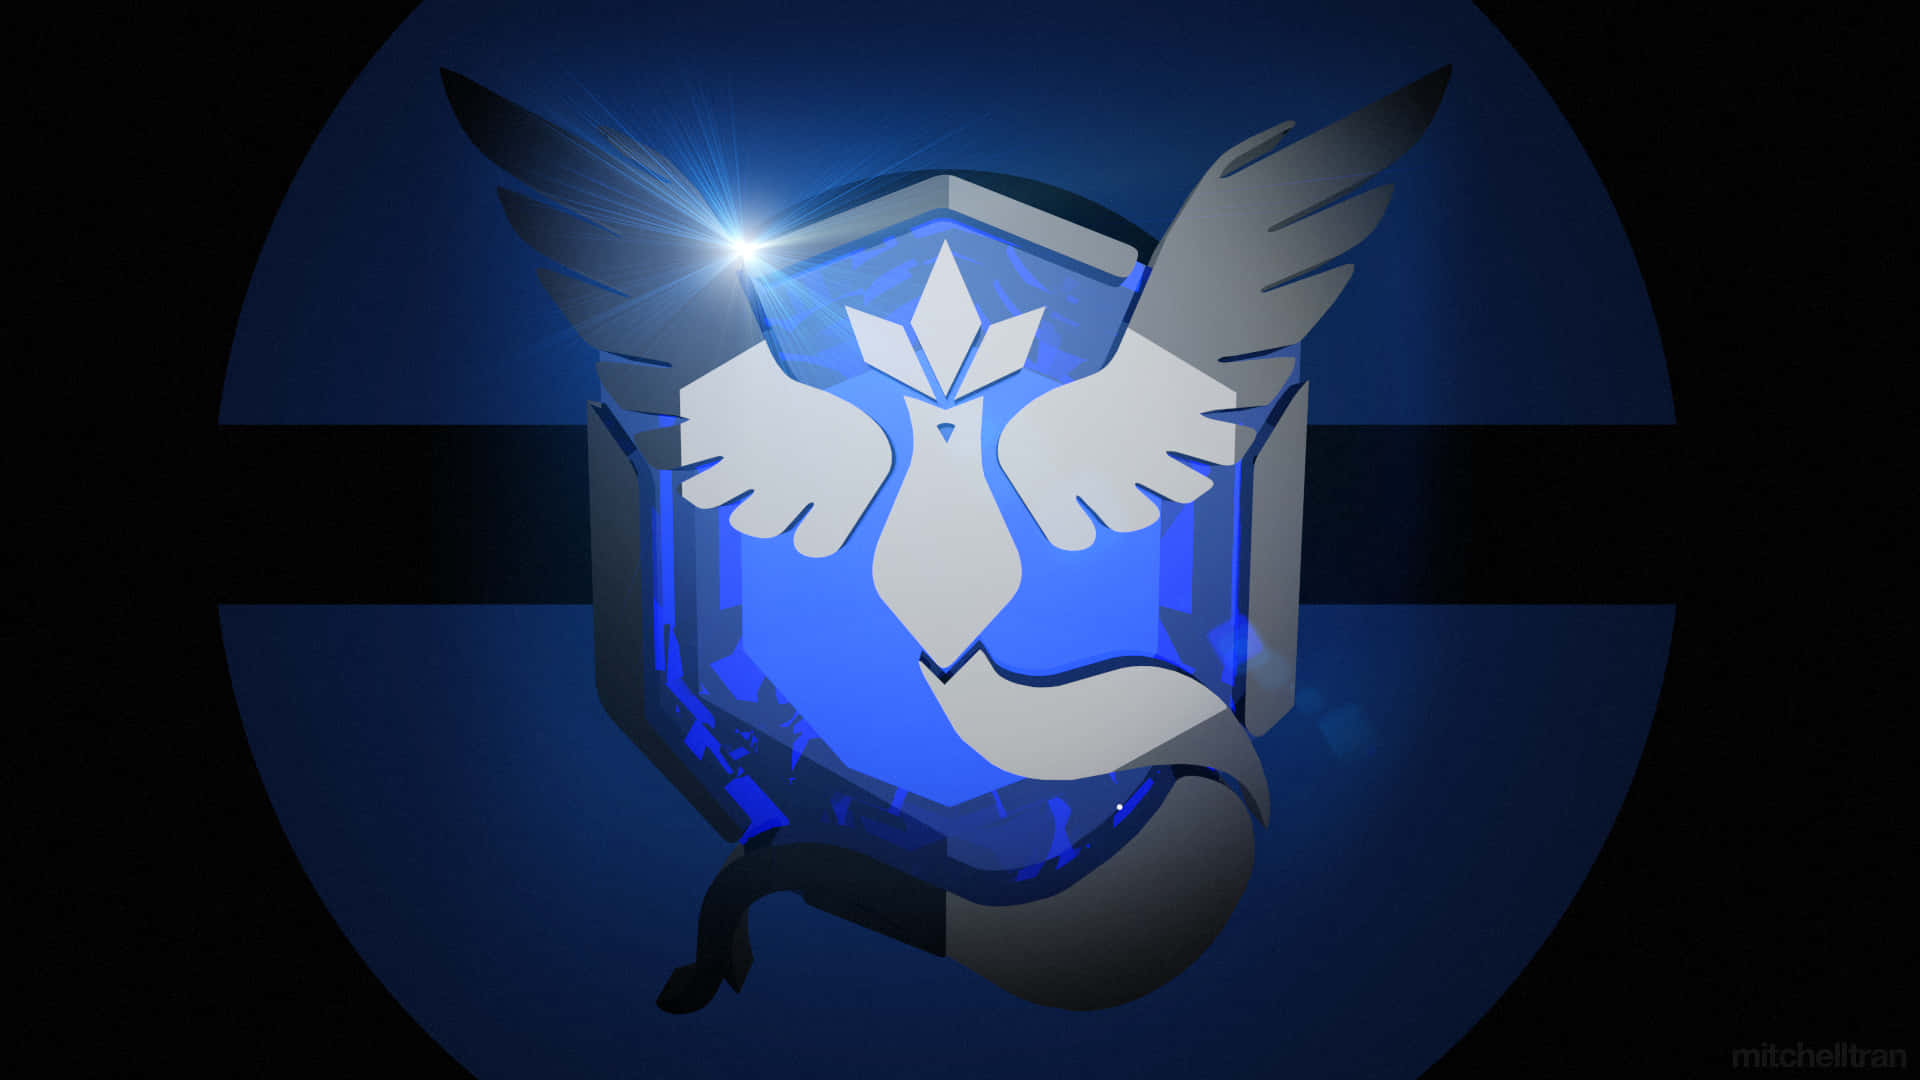 Believe In Team Mystic And Achieve Victory!